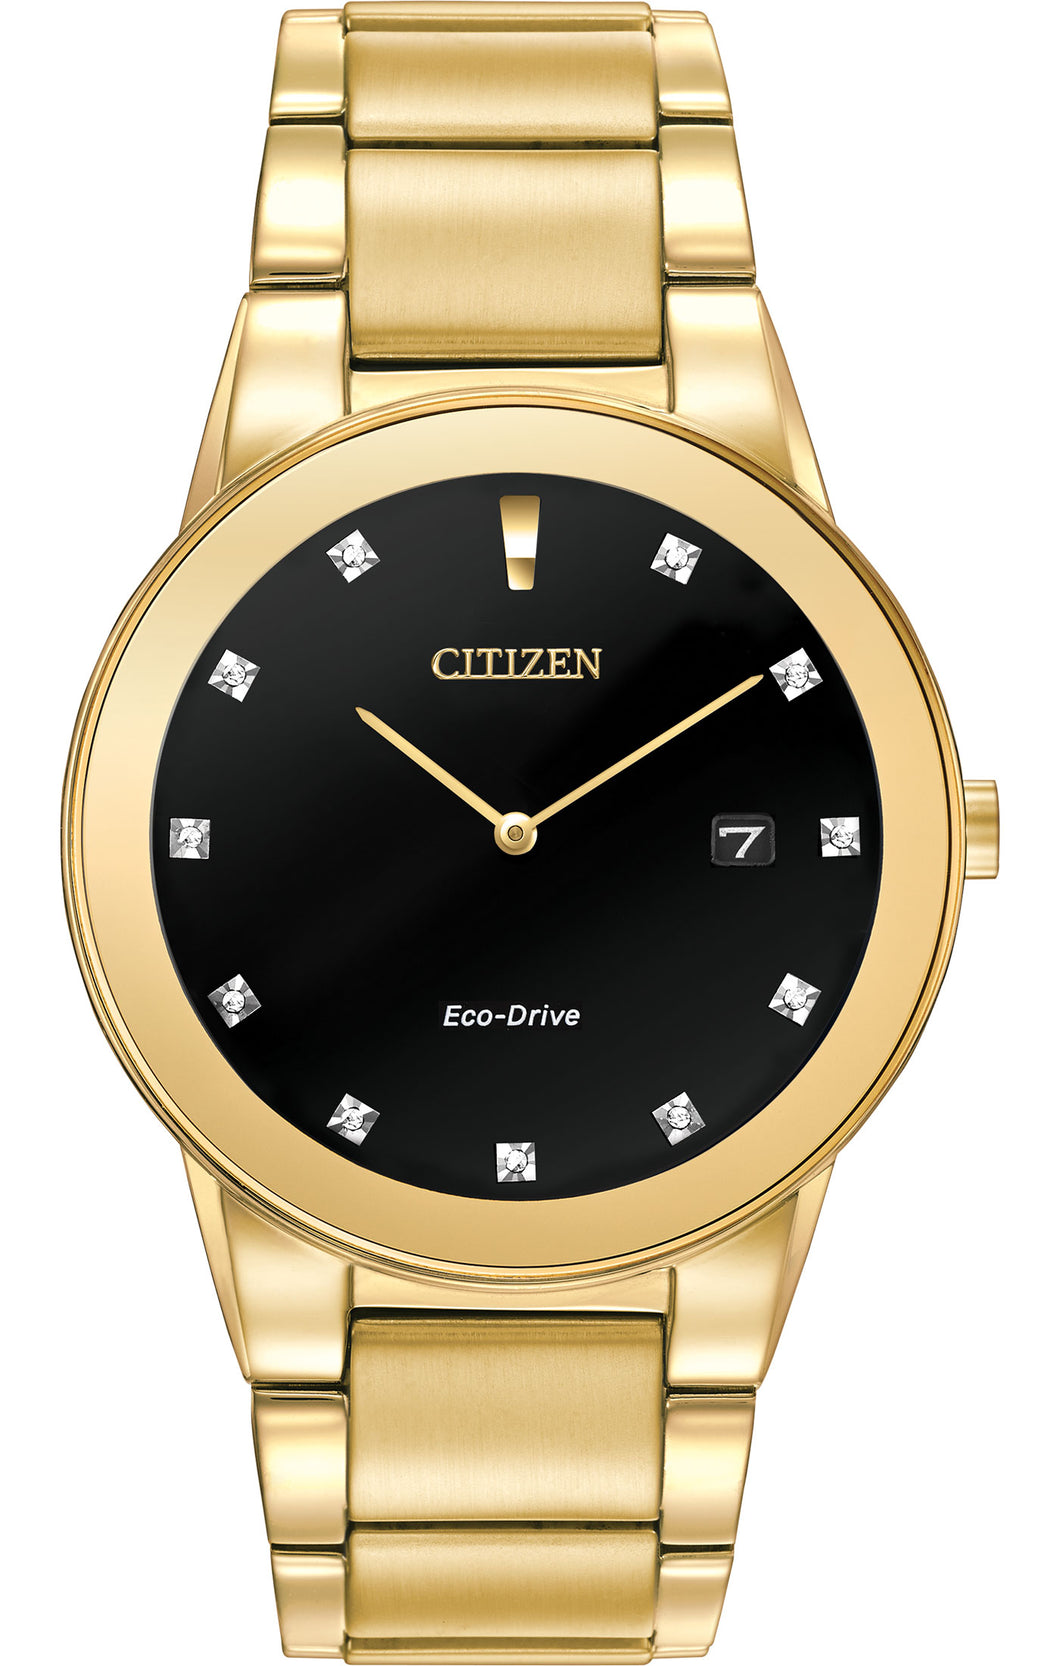 CITIZEN AXIOM AU1062-56G - Moments Watches & Jewelry